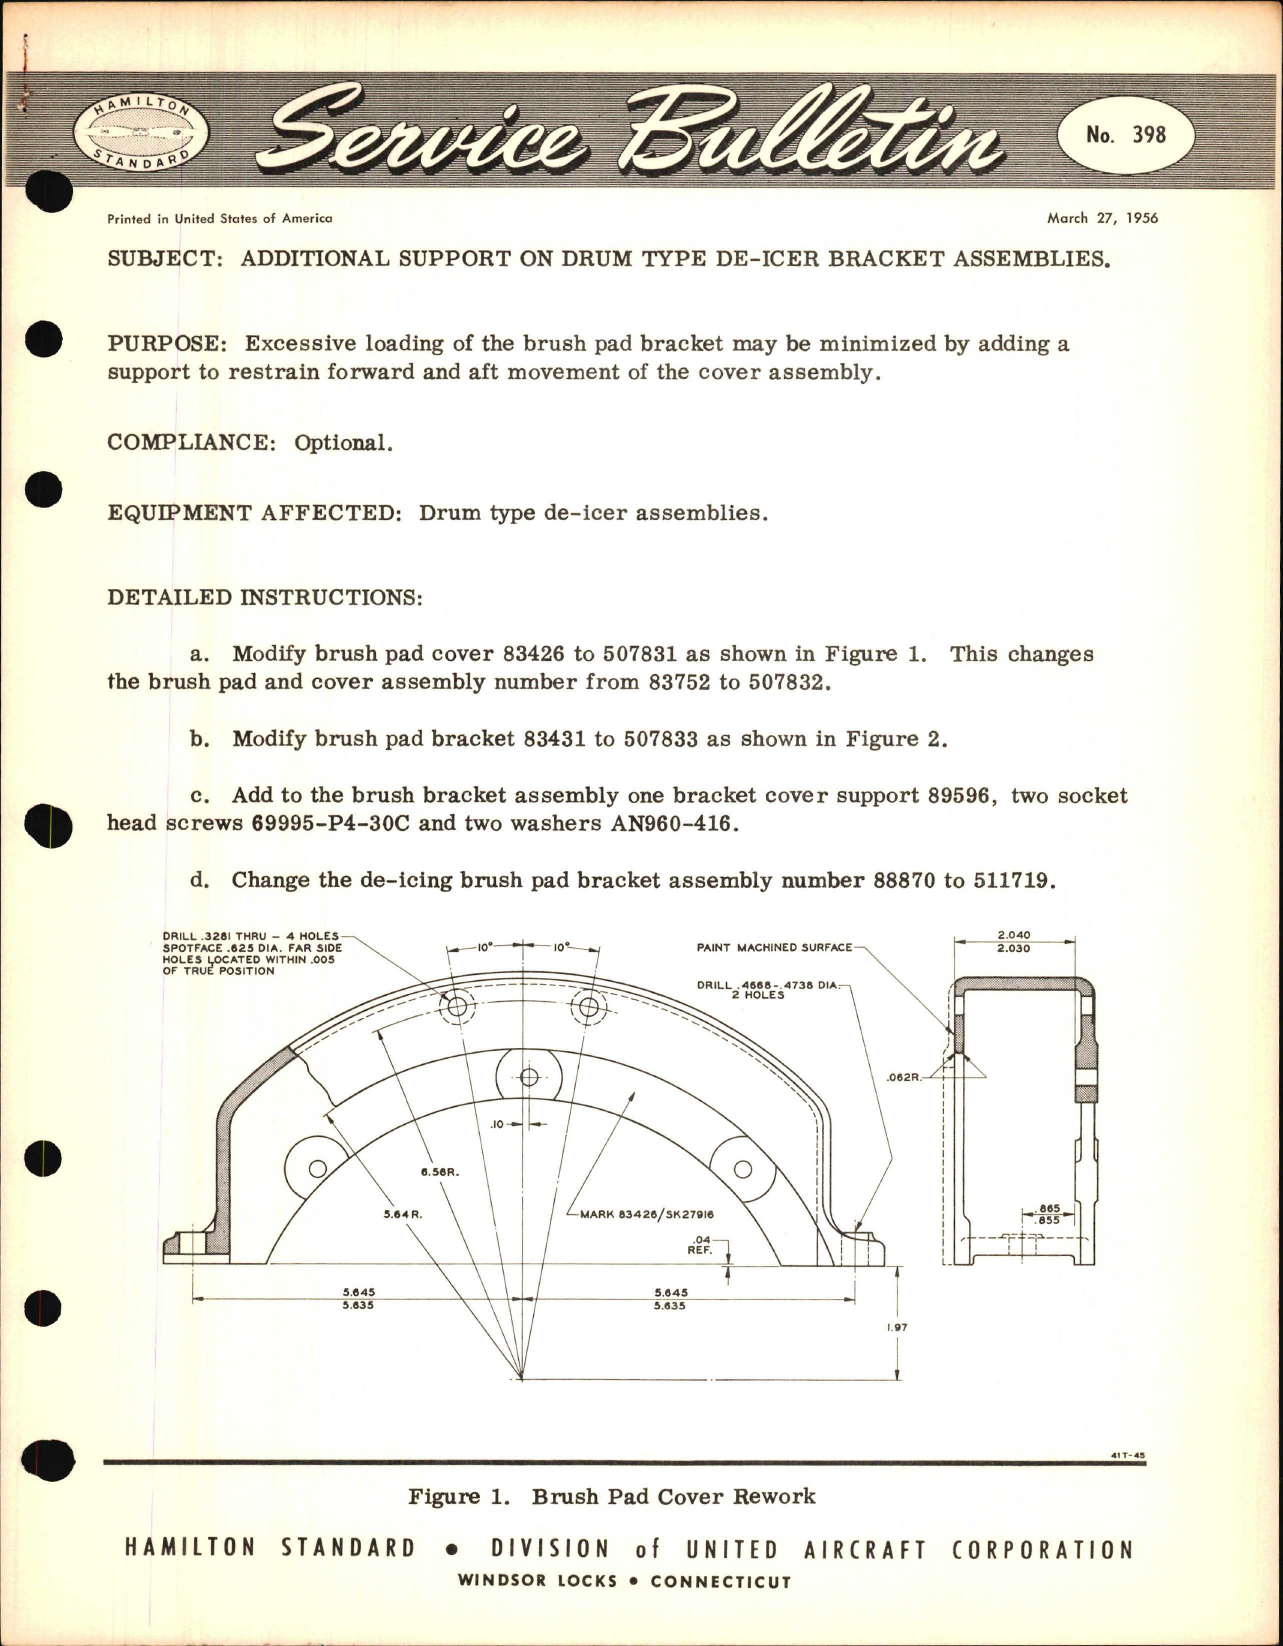 Sample page 1 from AirCorps Library document: Additional Support on Drum Type De-Icer Bracket Assemblies